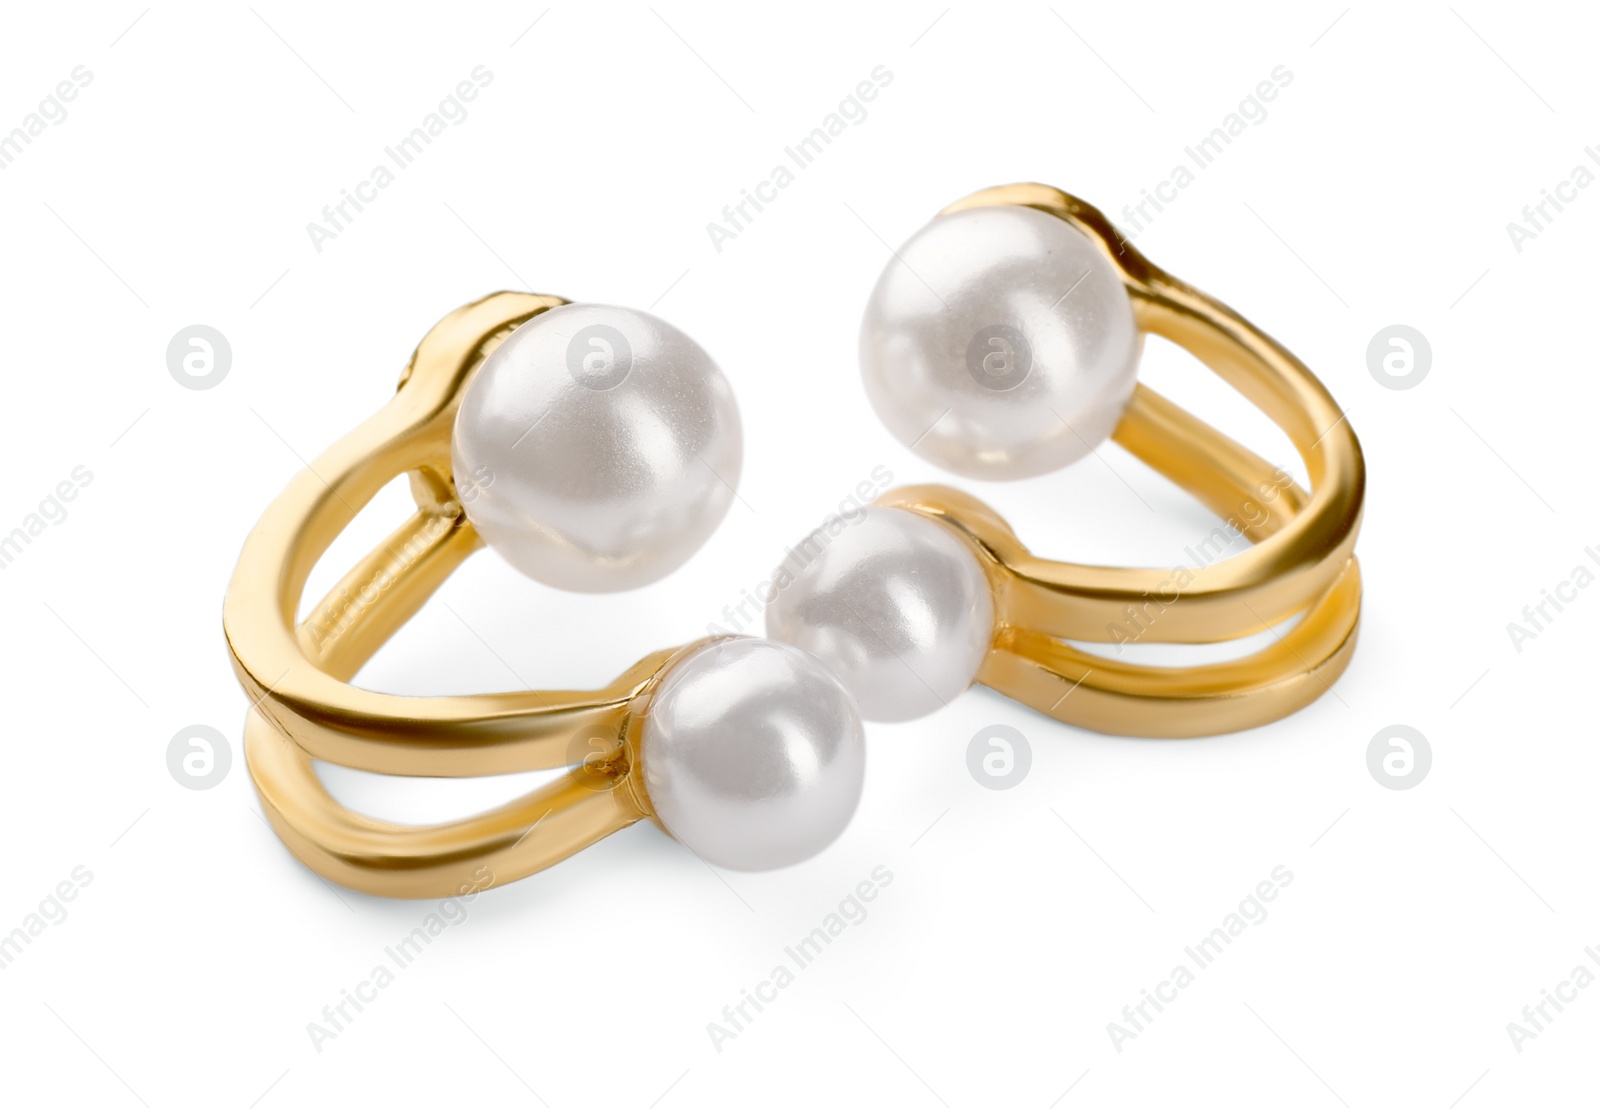 Photo of Elegant earrings with pearls isolated on white